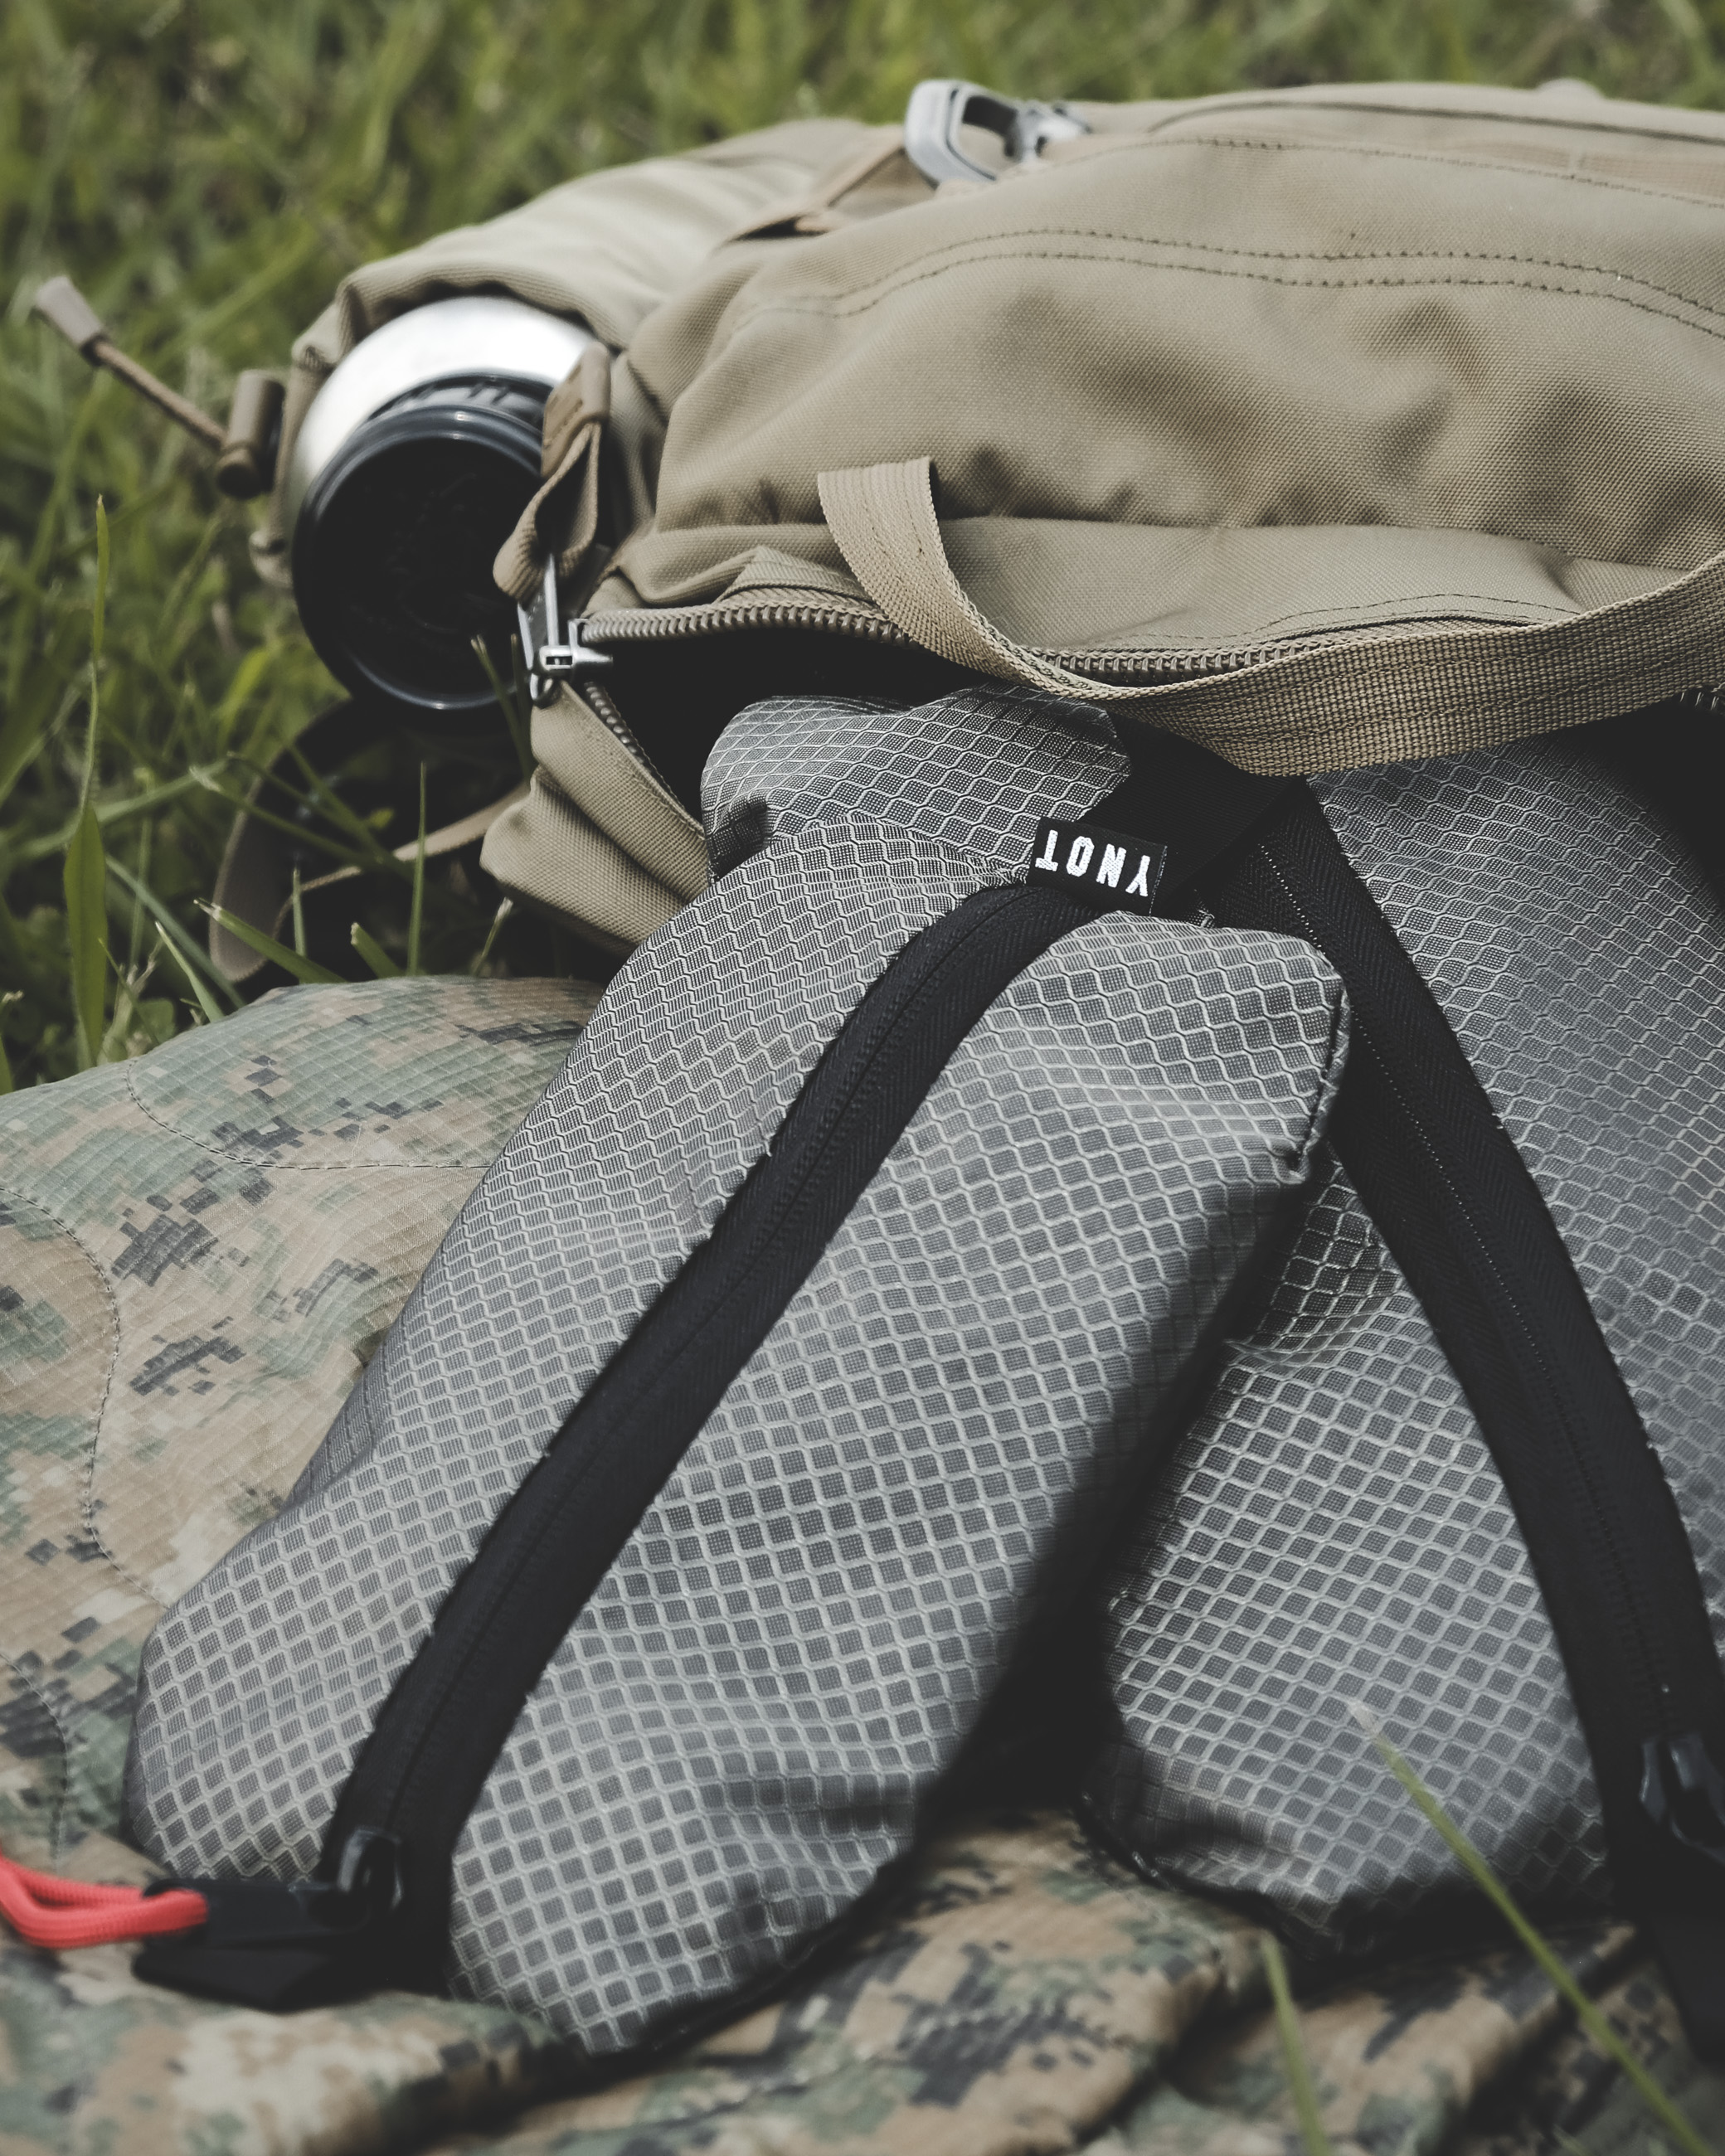 YNOT Wildland Packing Pouches Review